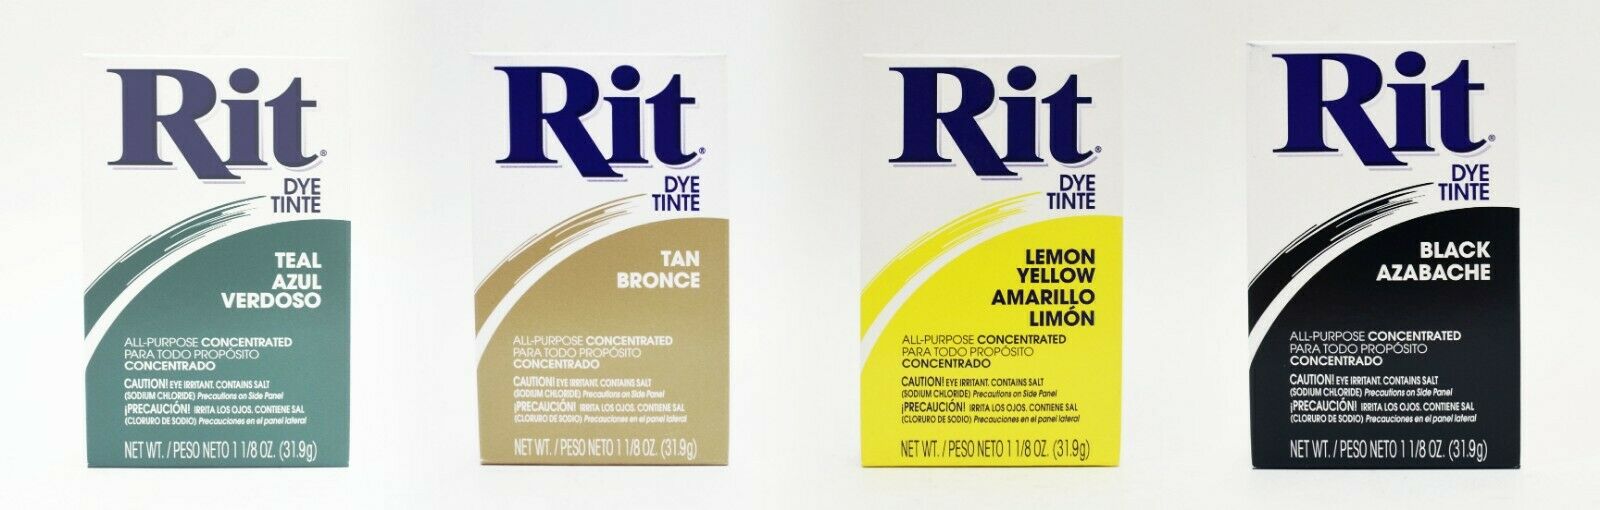 Rit Powder Dye, All Purpose Concentrated Fabric Dye - Multiple Colors, Free Ship